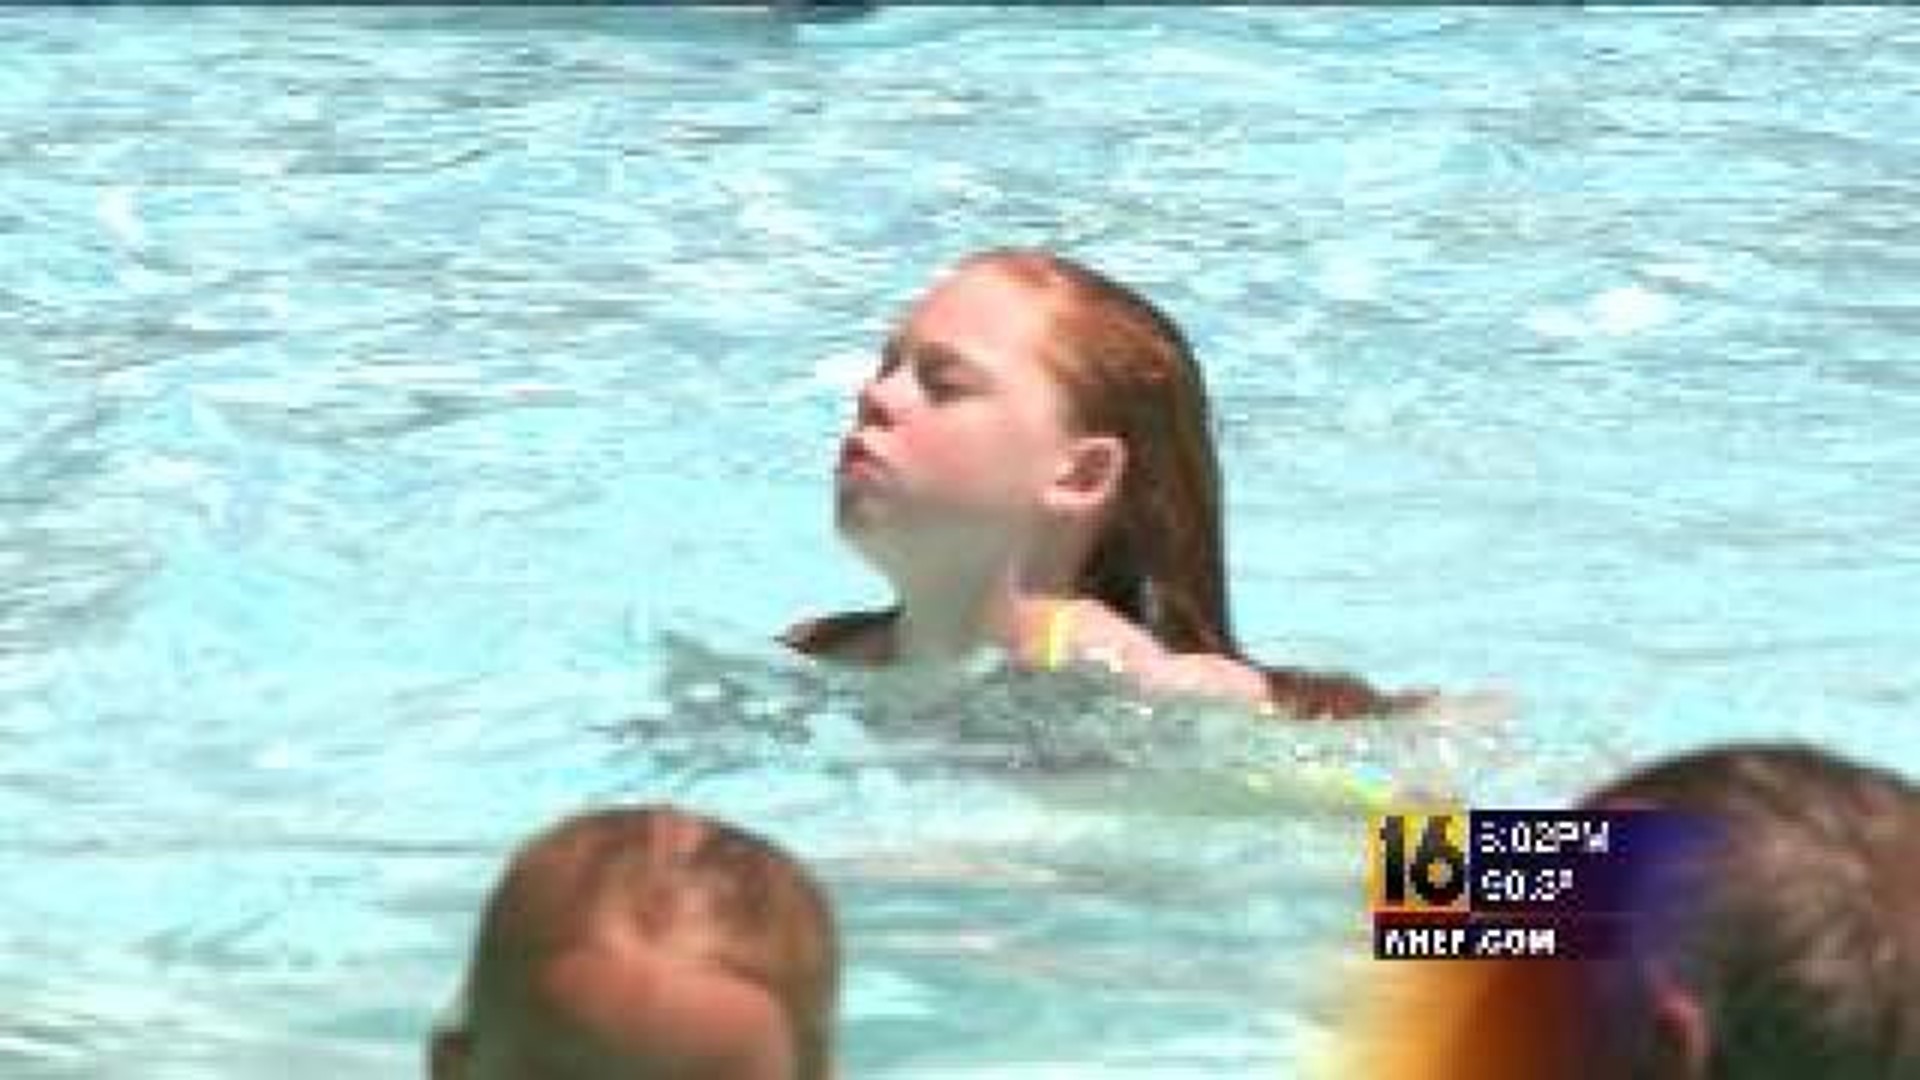 Families Head to Knoebels To Stay Cool